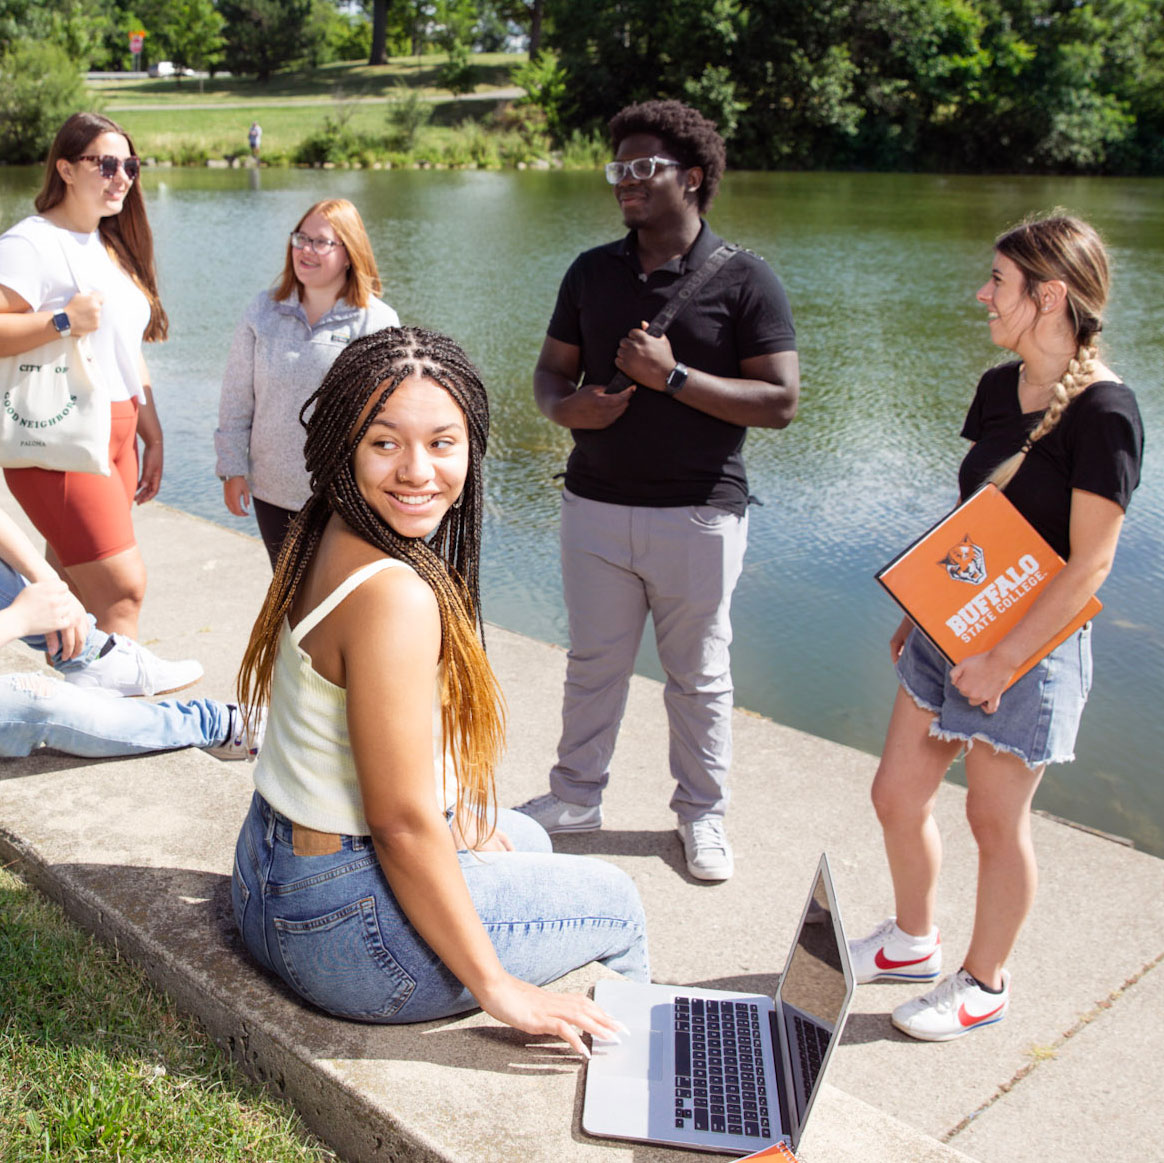 Group of students talking in the park with notebooks and study materials